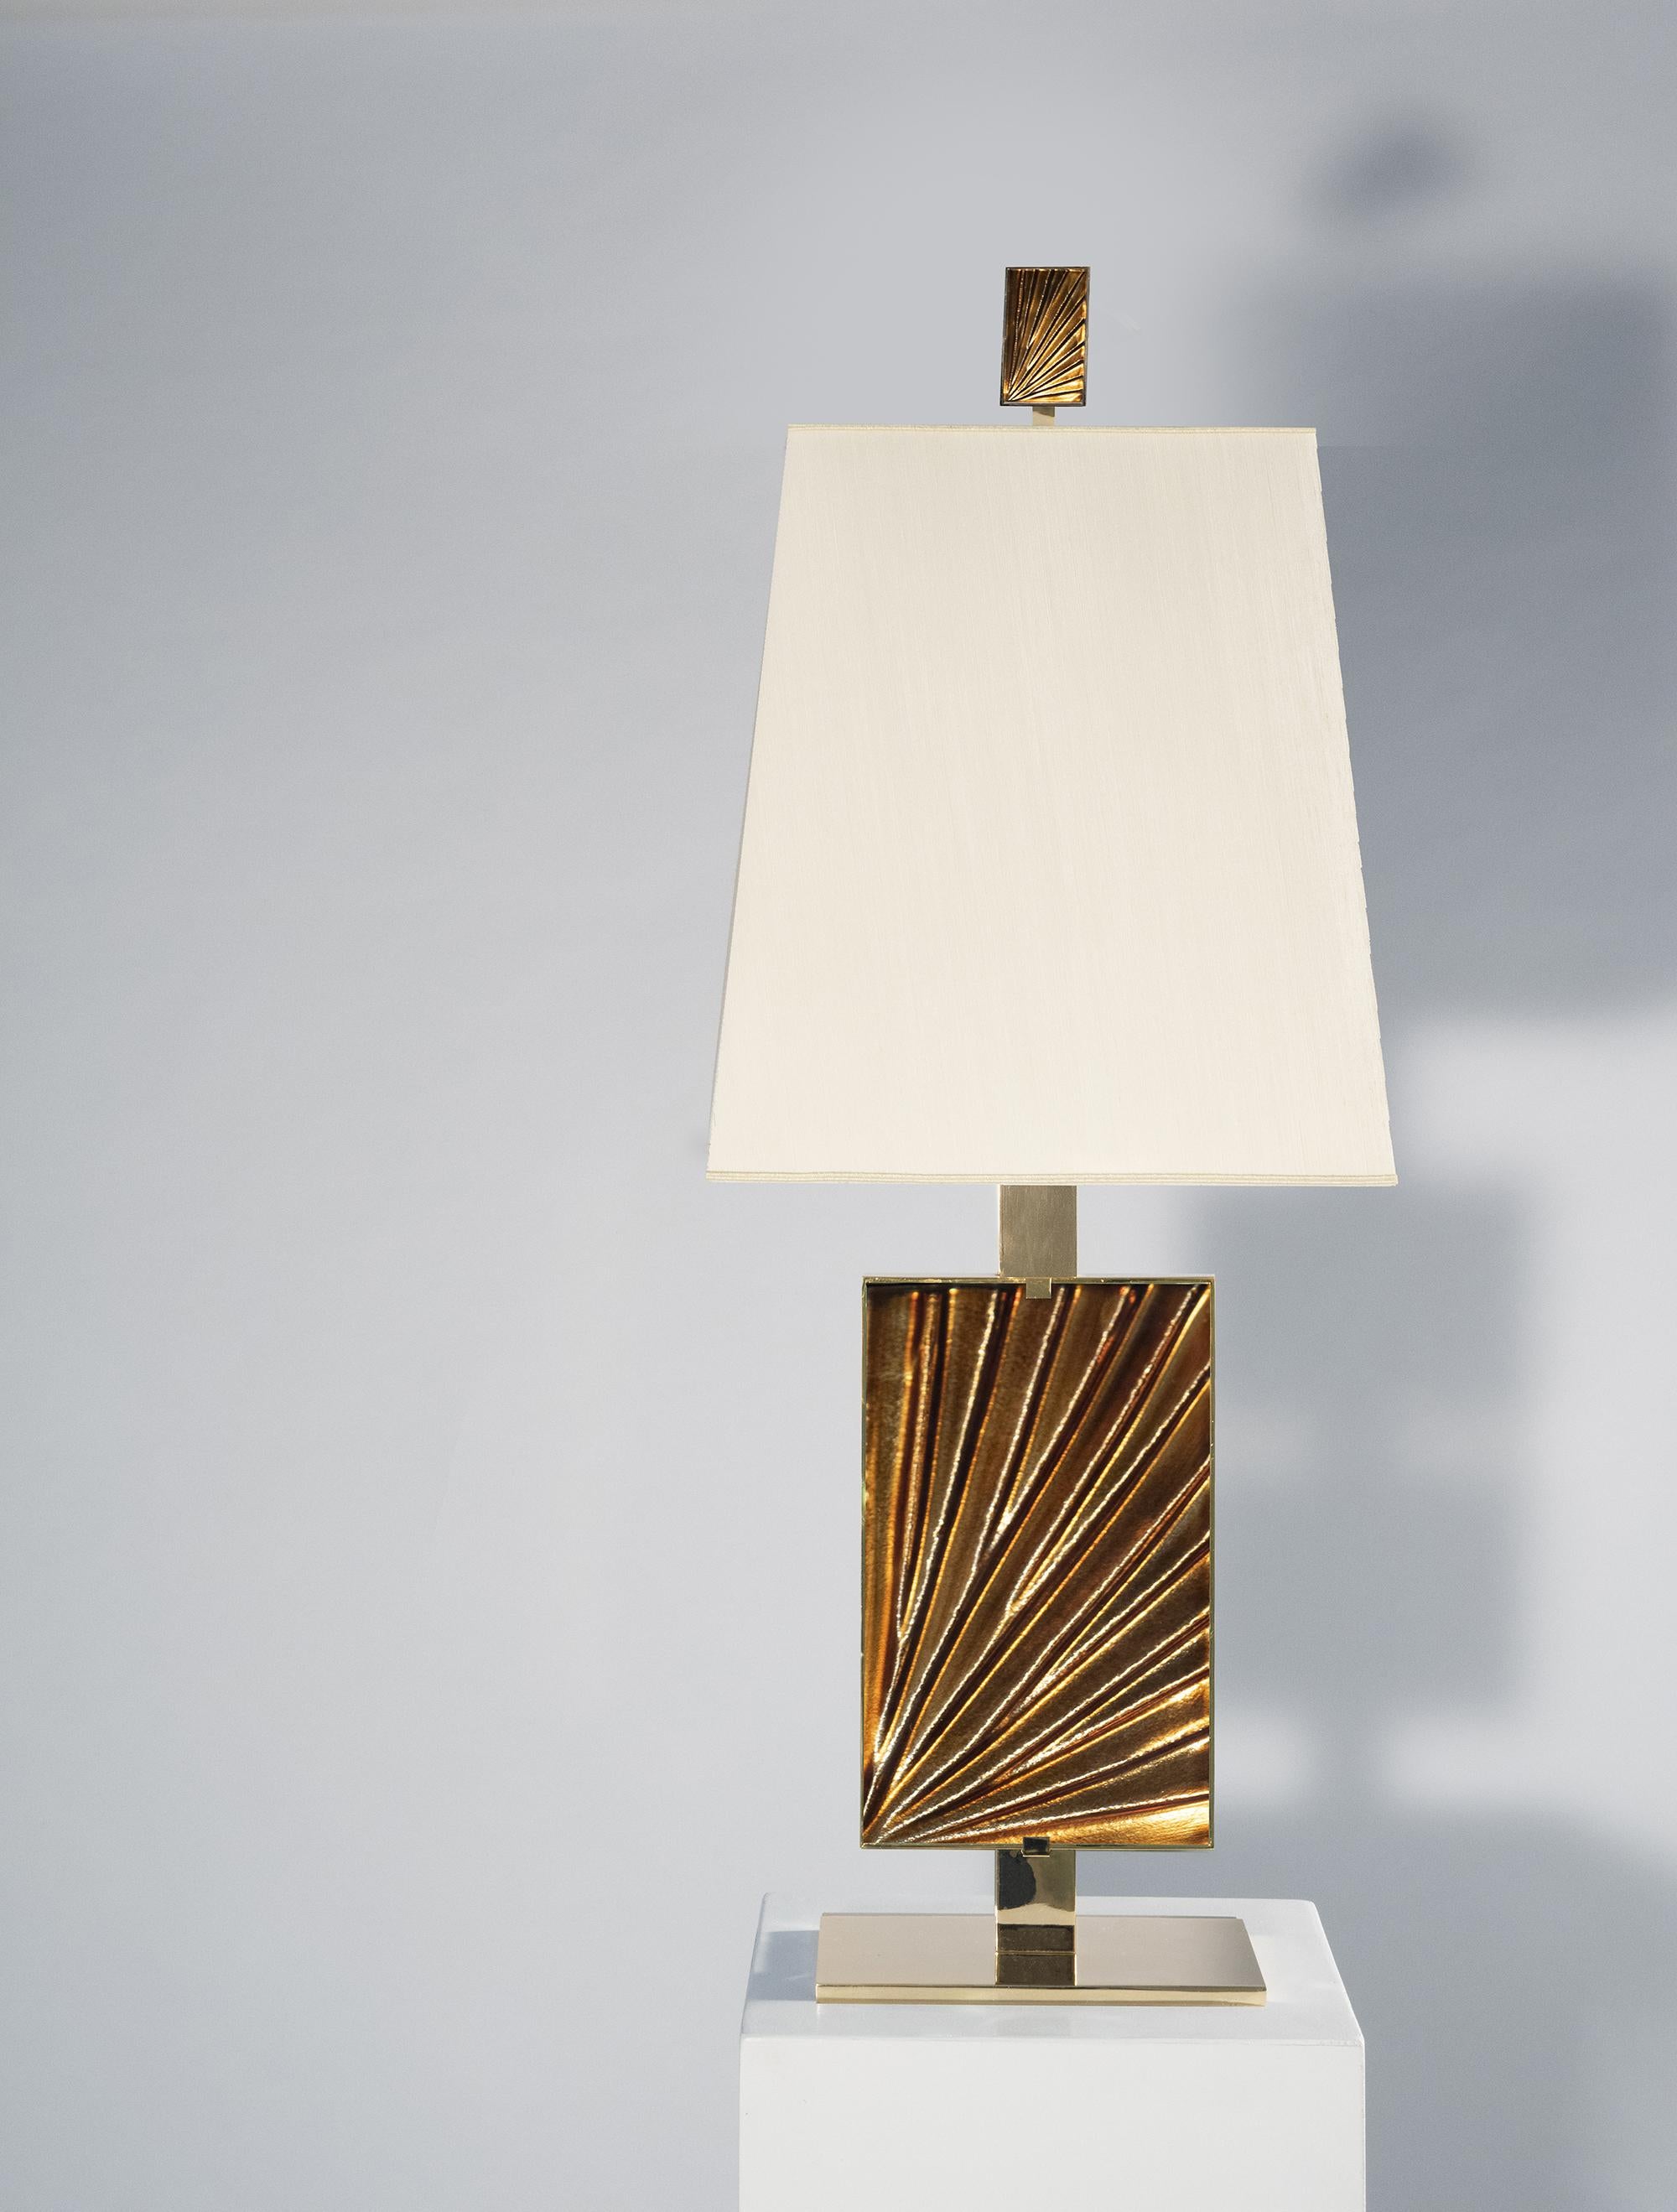 2021 'Ambra' Collection of table lamps by Ghirò Studio (Milan).
The 'Ambra' lamp is not just a table lamp. It’s an object of pure art and design. Sober, fine and elegant even when off, it is ideal to give a touch of color and elegance to the bedroom